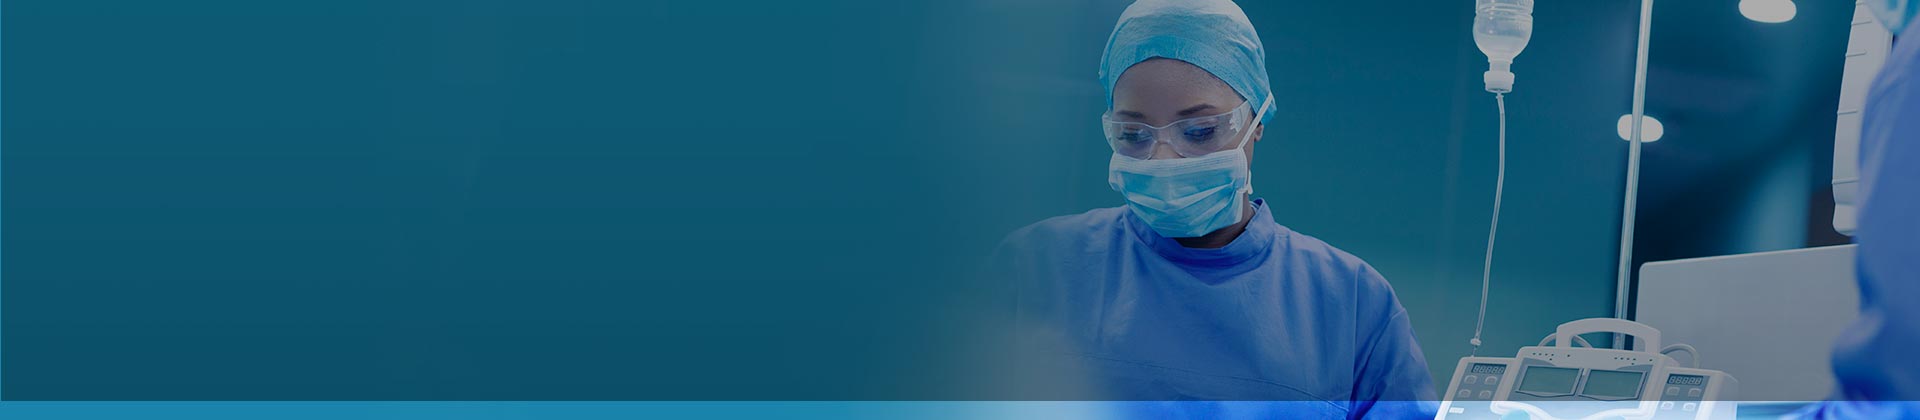 Travel nurse with mask over face and wearing blue scrubs in operating room.